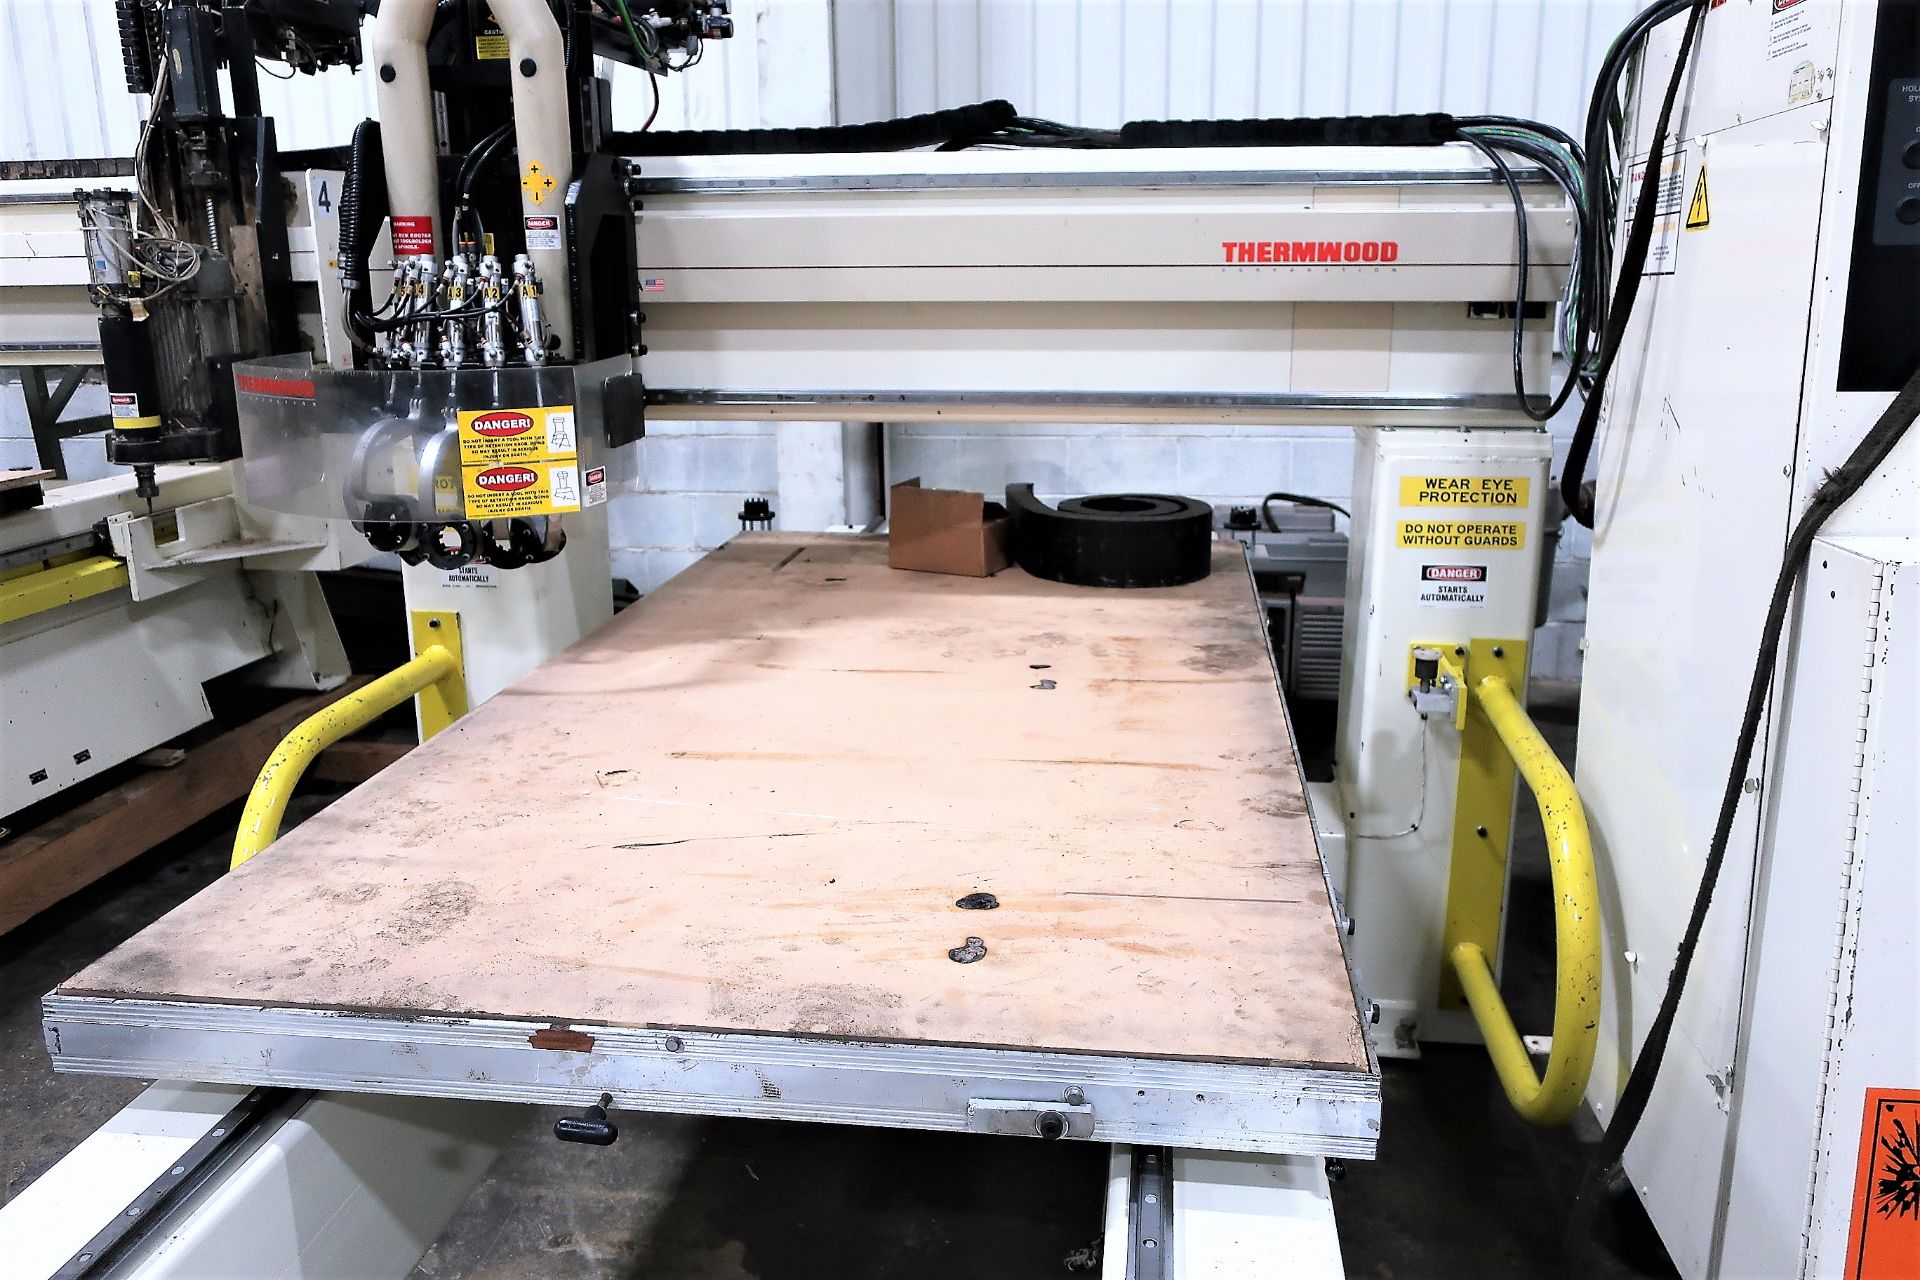 4'X'8' THERMWOOD C40 3-AXIS CNC ROUTER, S/N CS400430904, NEW 2004 - Image 3 of 9